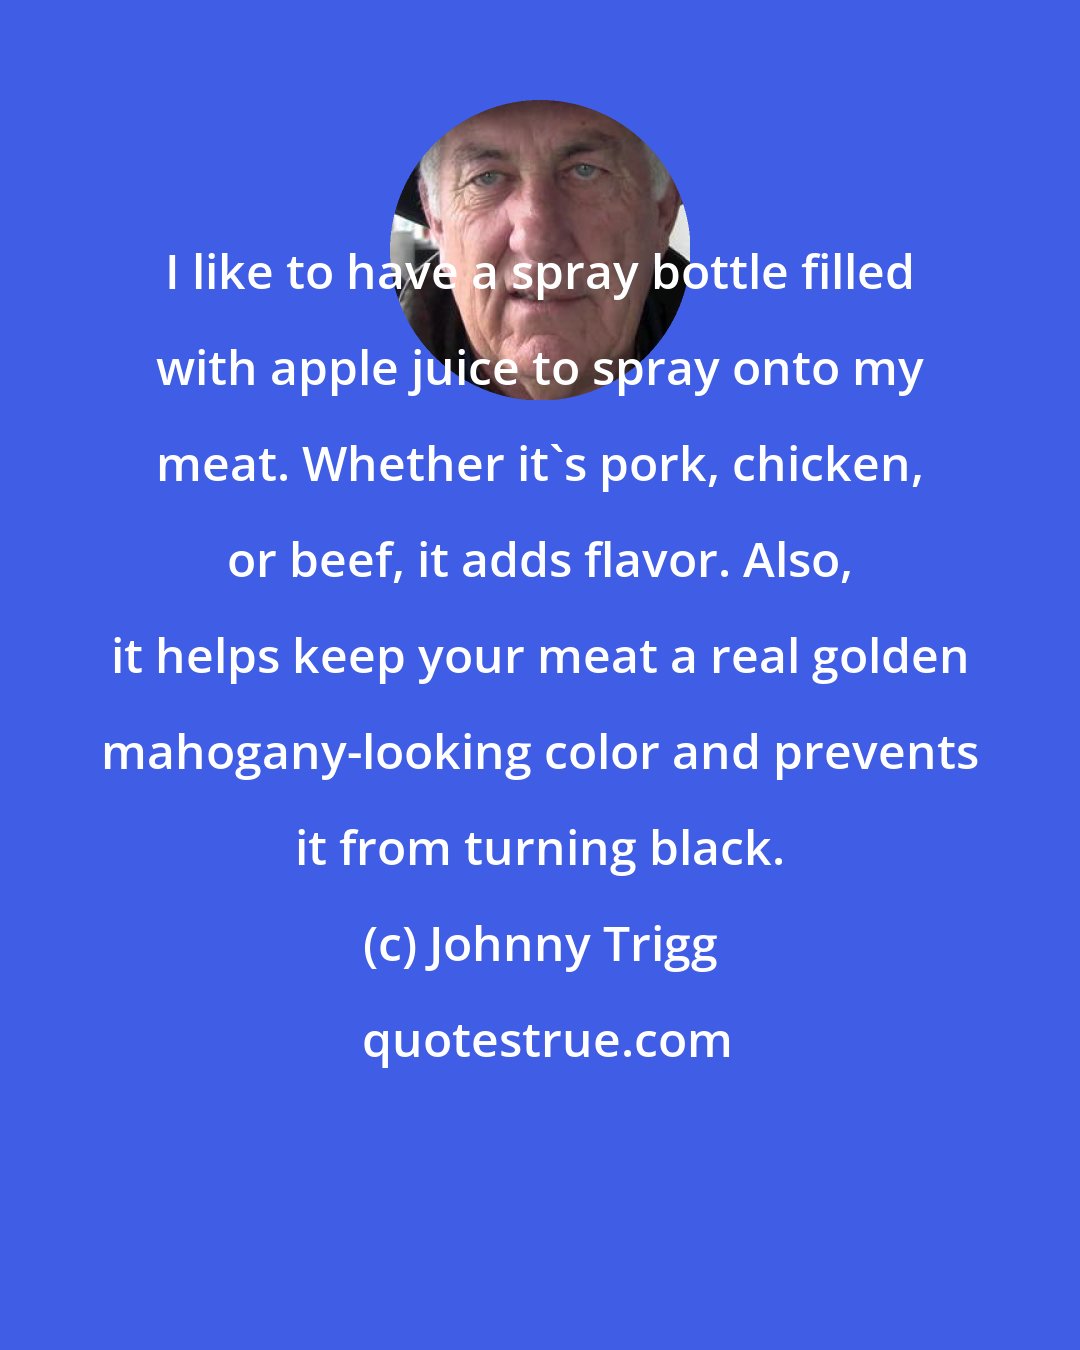 Johnny Trigg: I like to have a spray bottle filled with apple juice to spray onto my meat. Whether it's pork, chicken, or beef, it adds flavor. Also, it helps keep your meat a real golden mahogany-looking color and prevents it from turning black.